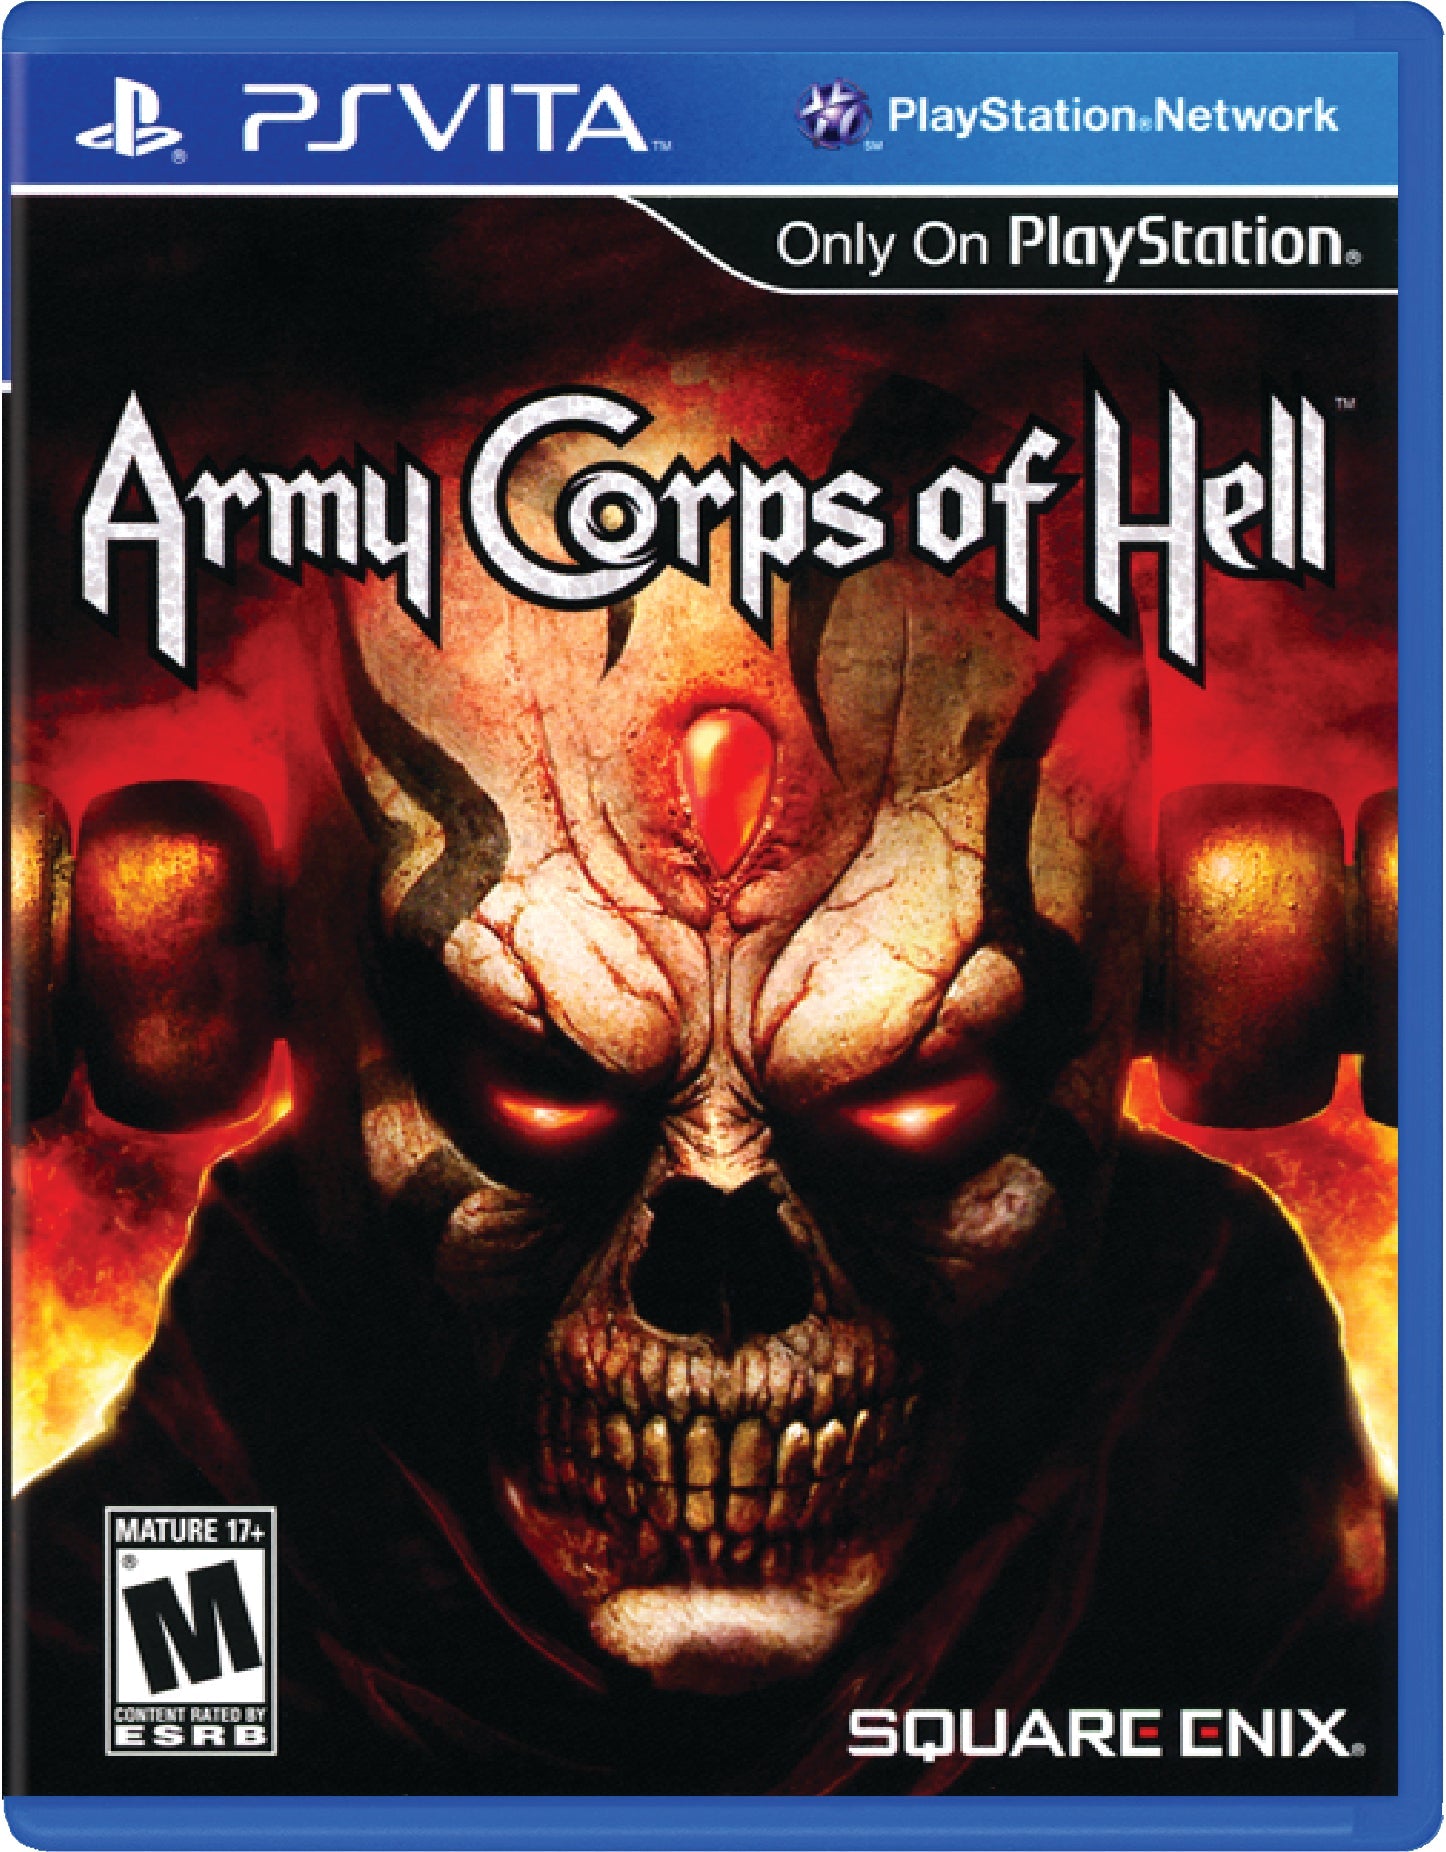 Army Corps of Hell Cover Art